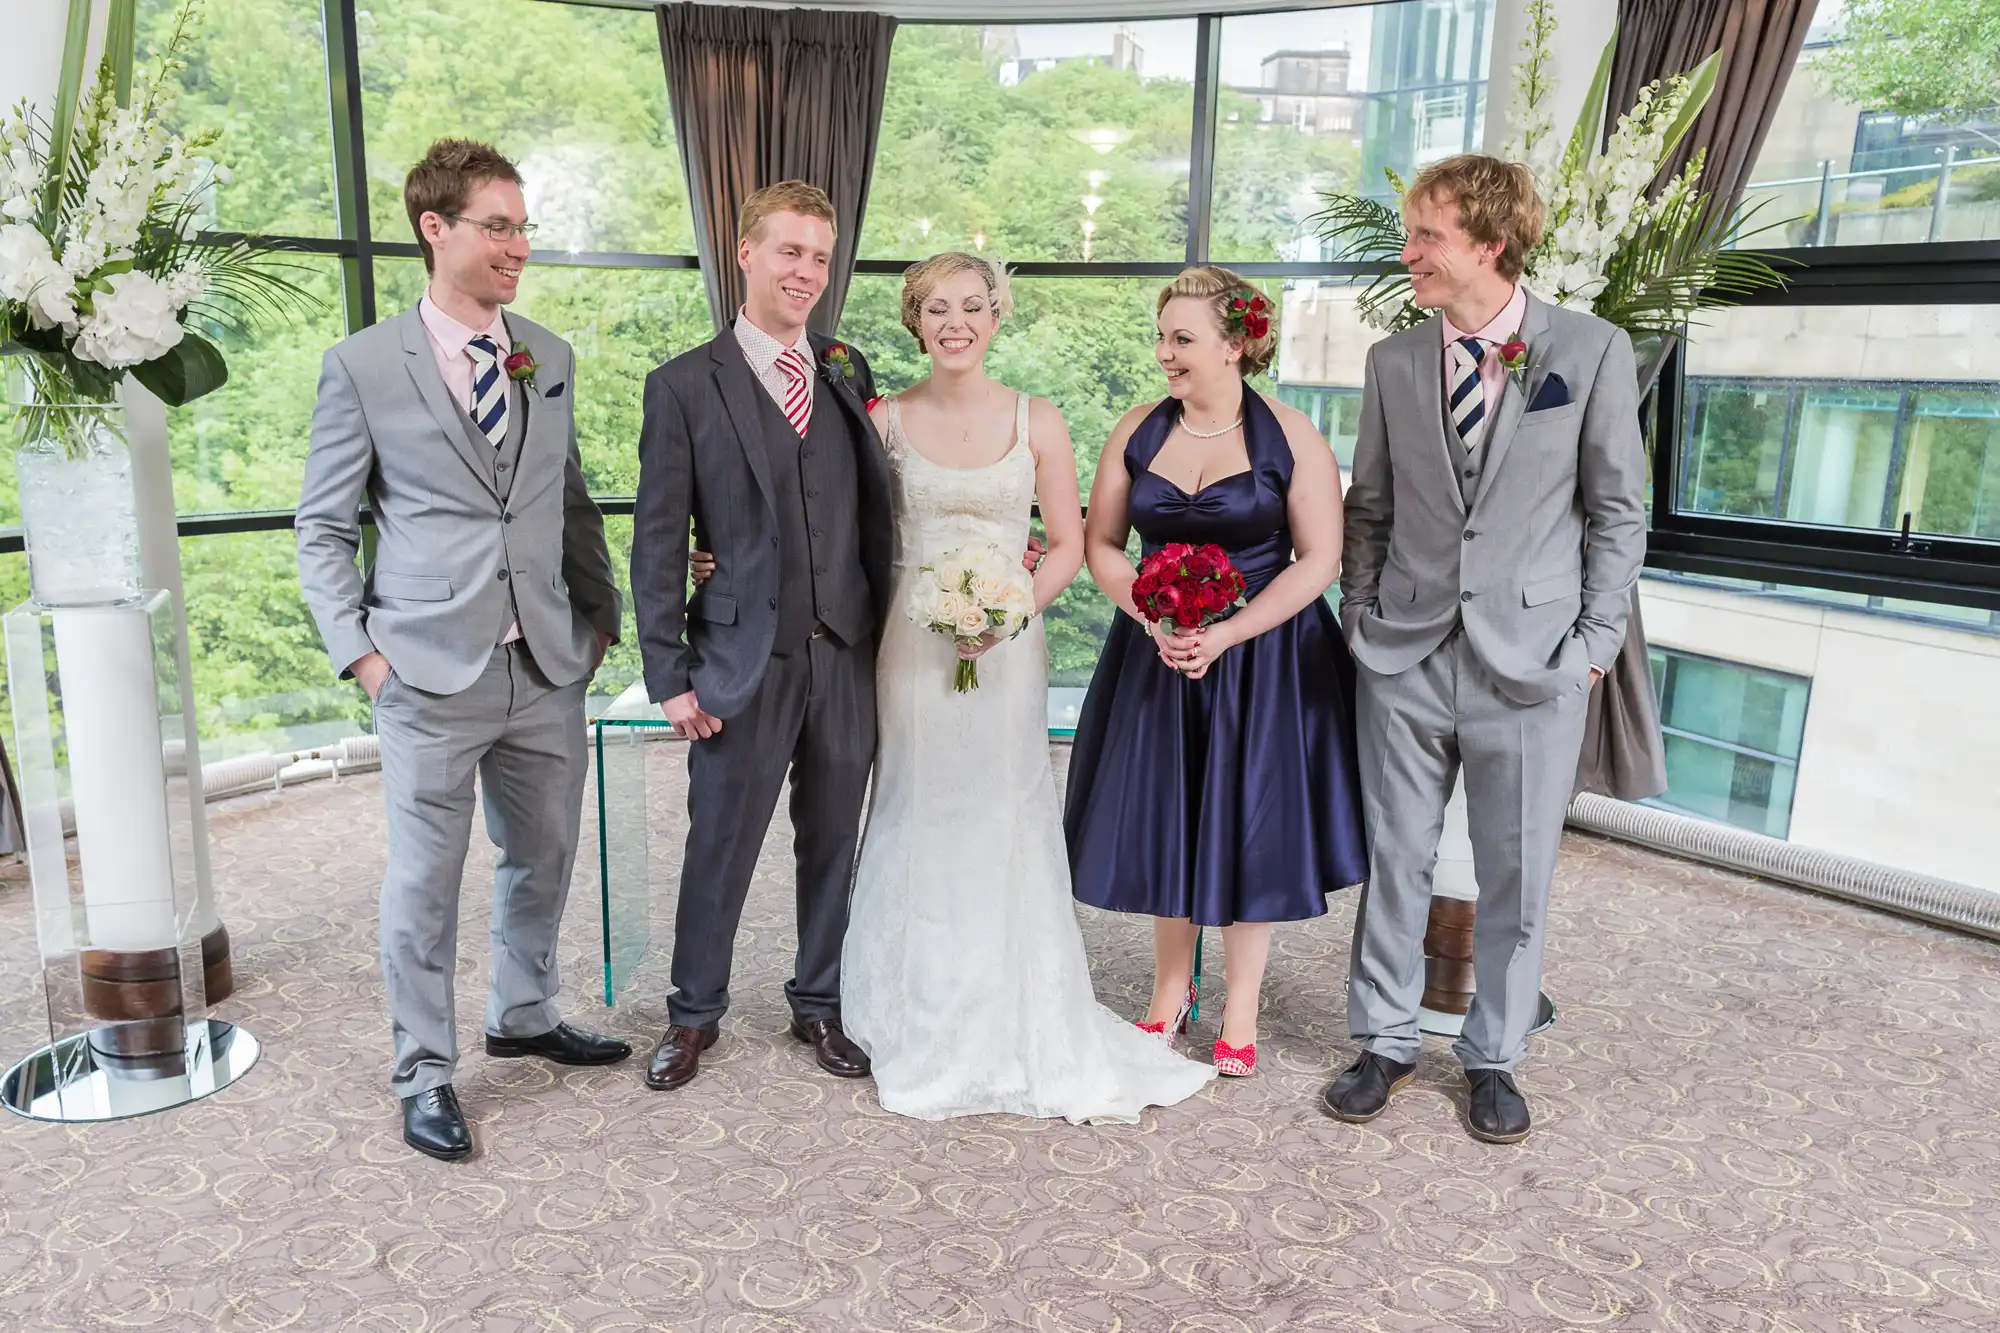 A bride and groom posing happily with three friends in formal attire at an indoor wedding venue with large windows and greenery outside.